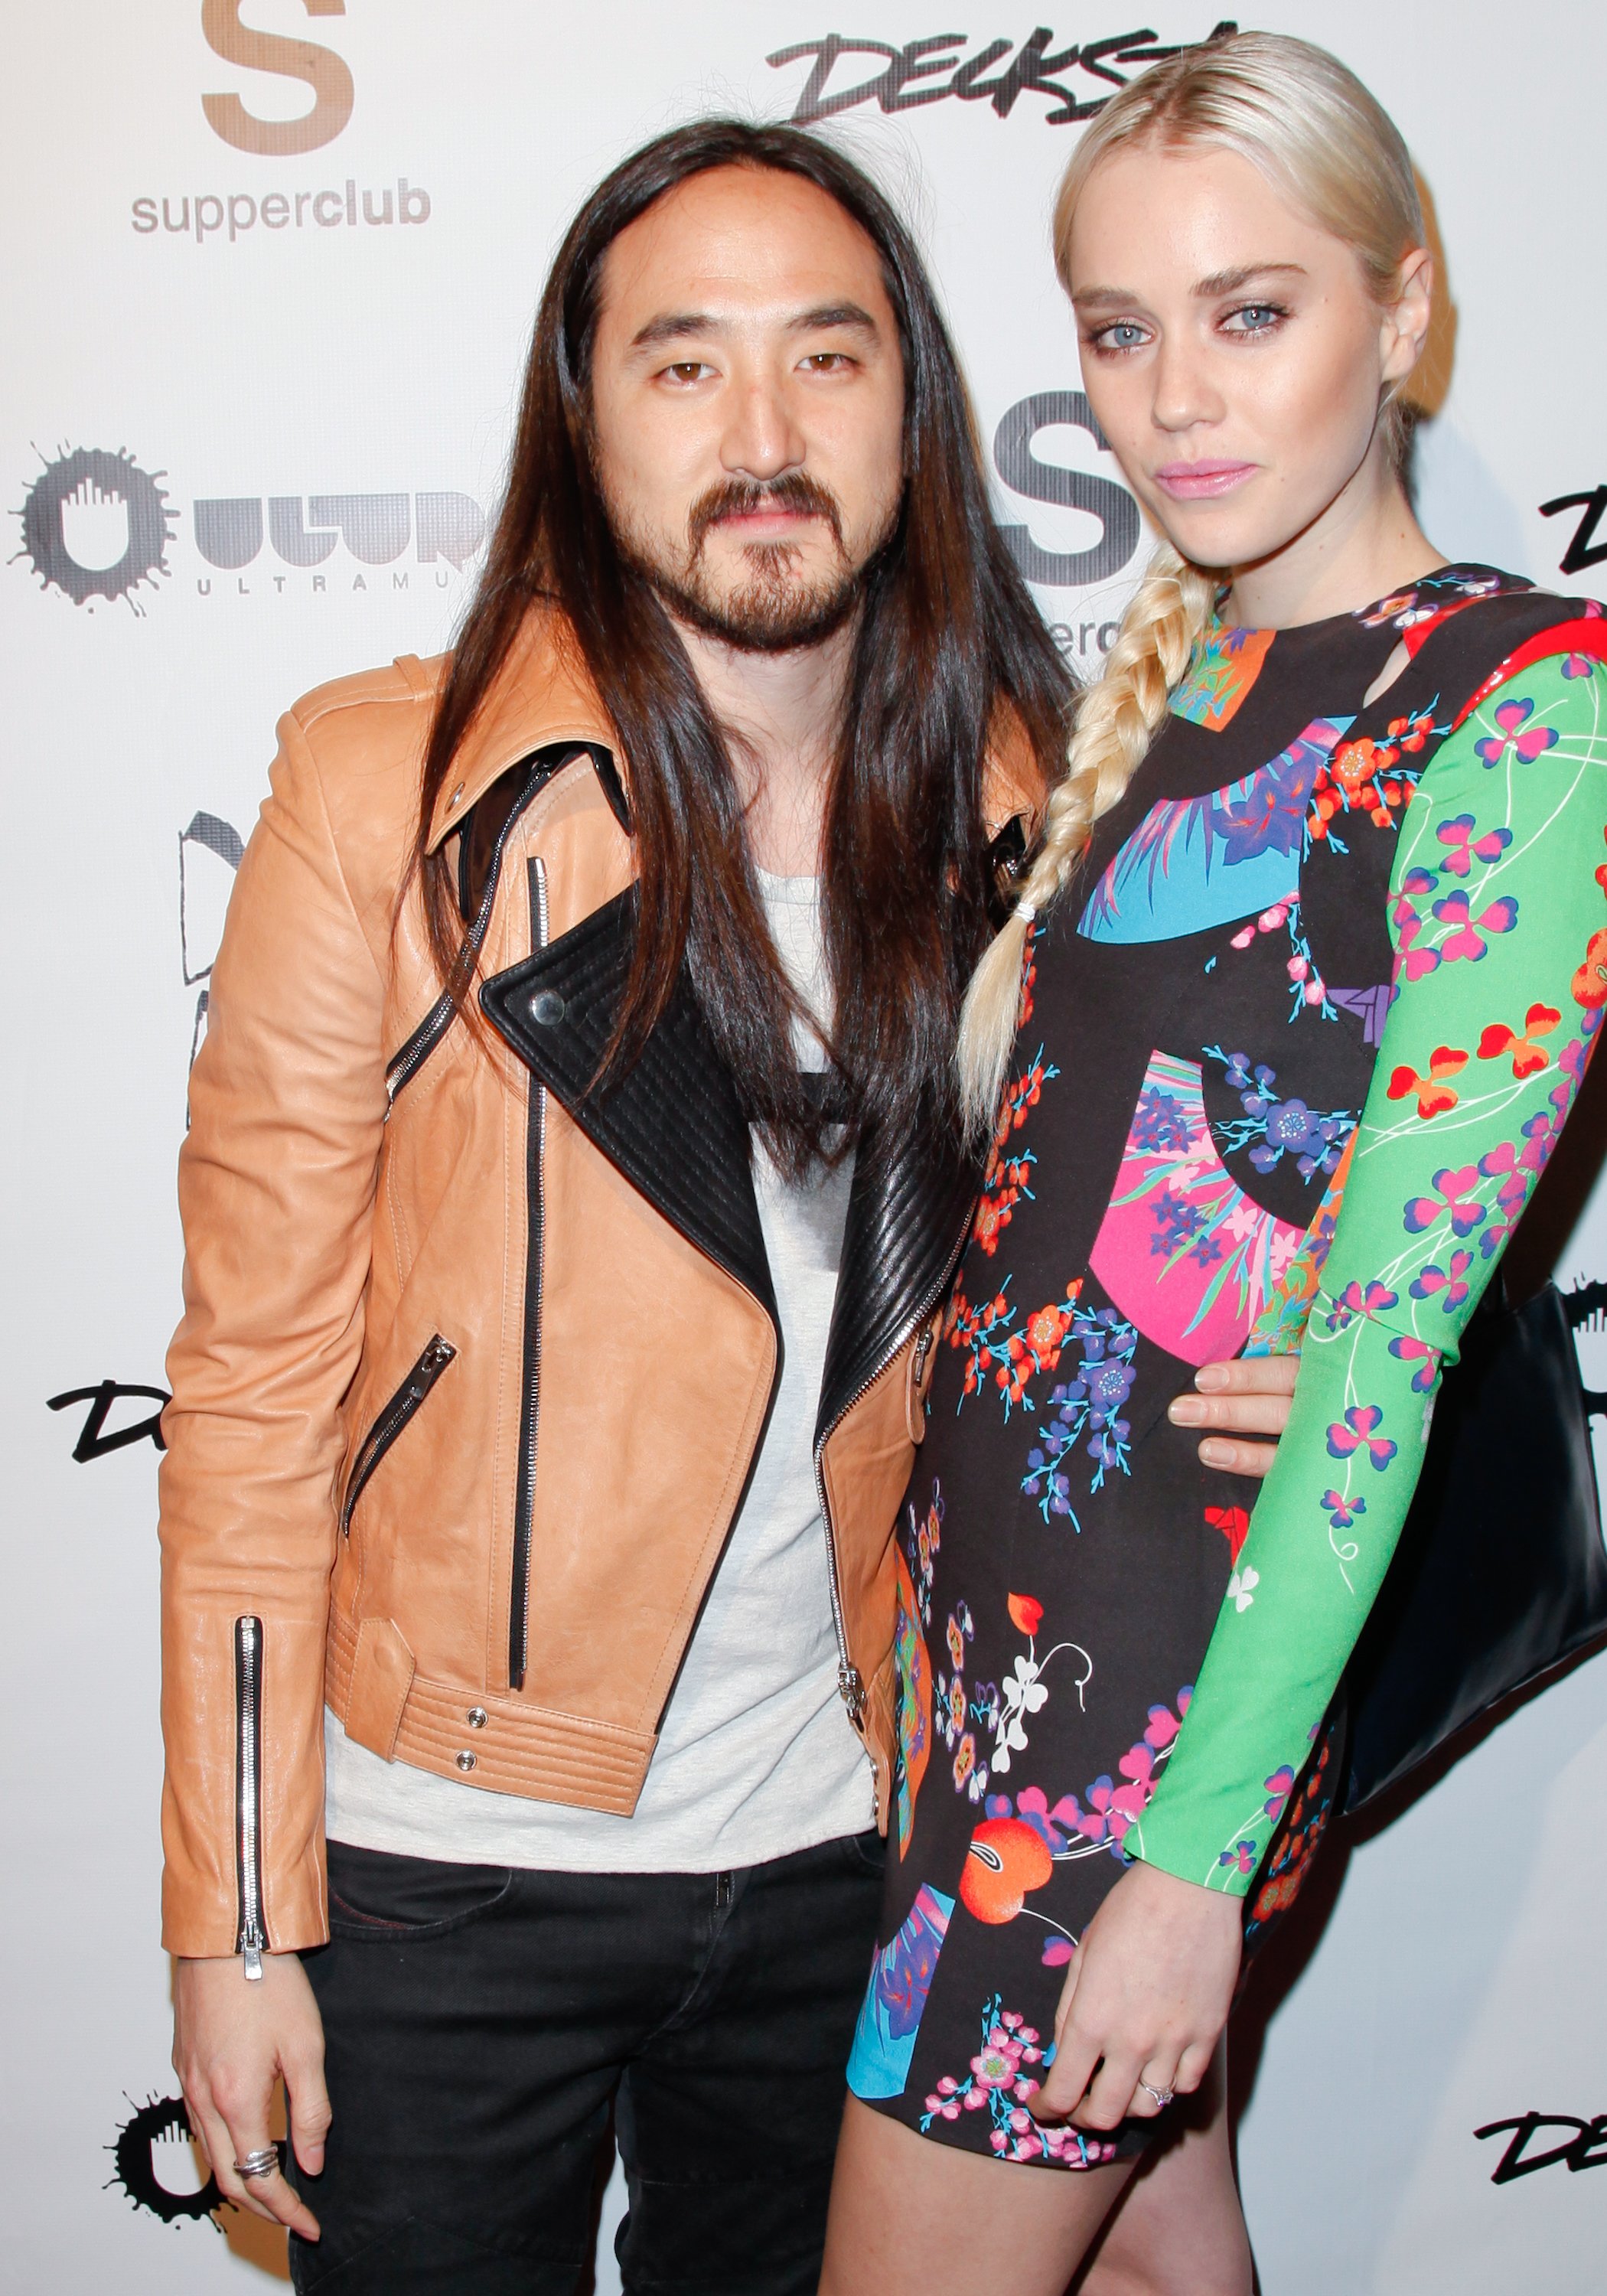 Steve Aoki and Tiernan Cowling attend Steve Aoki's "Wonderland" record release party and red carpet event at SupperClub Los Angeles in Los Angeles, California on January 18, 2012 | Source: Getty Images